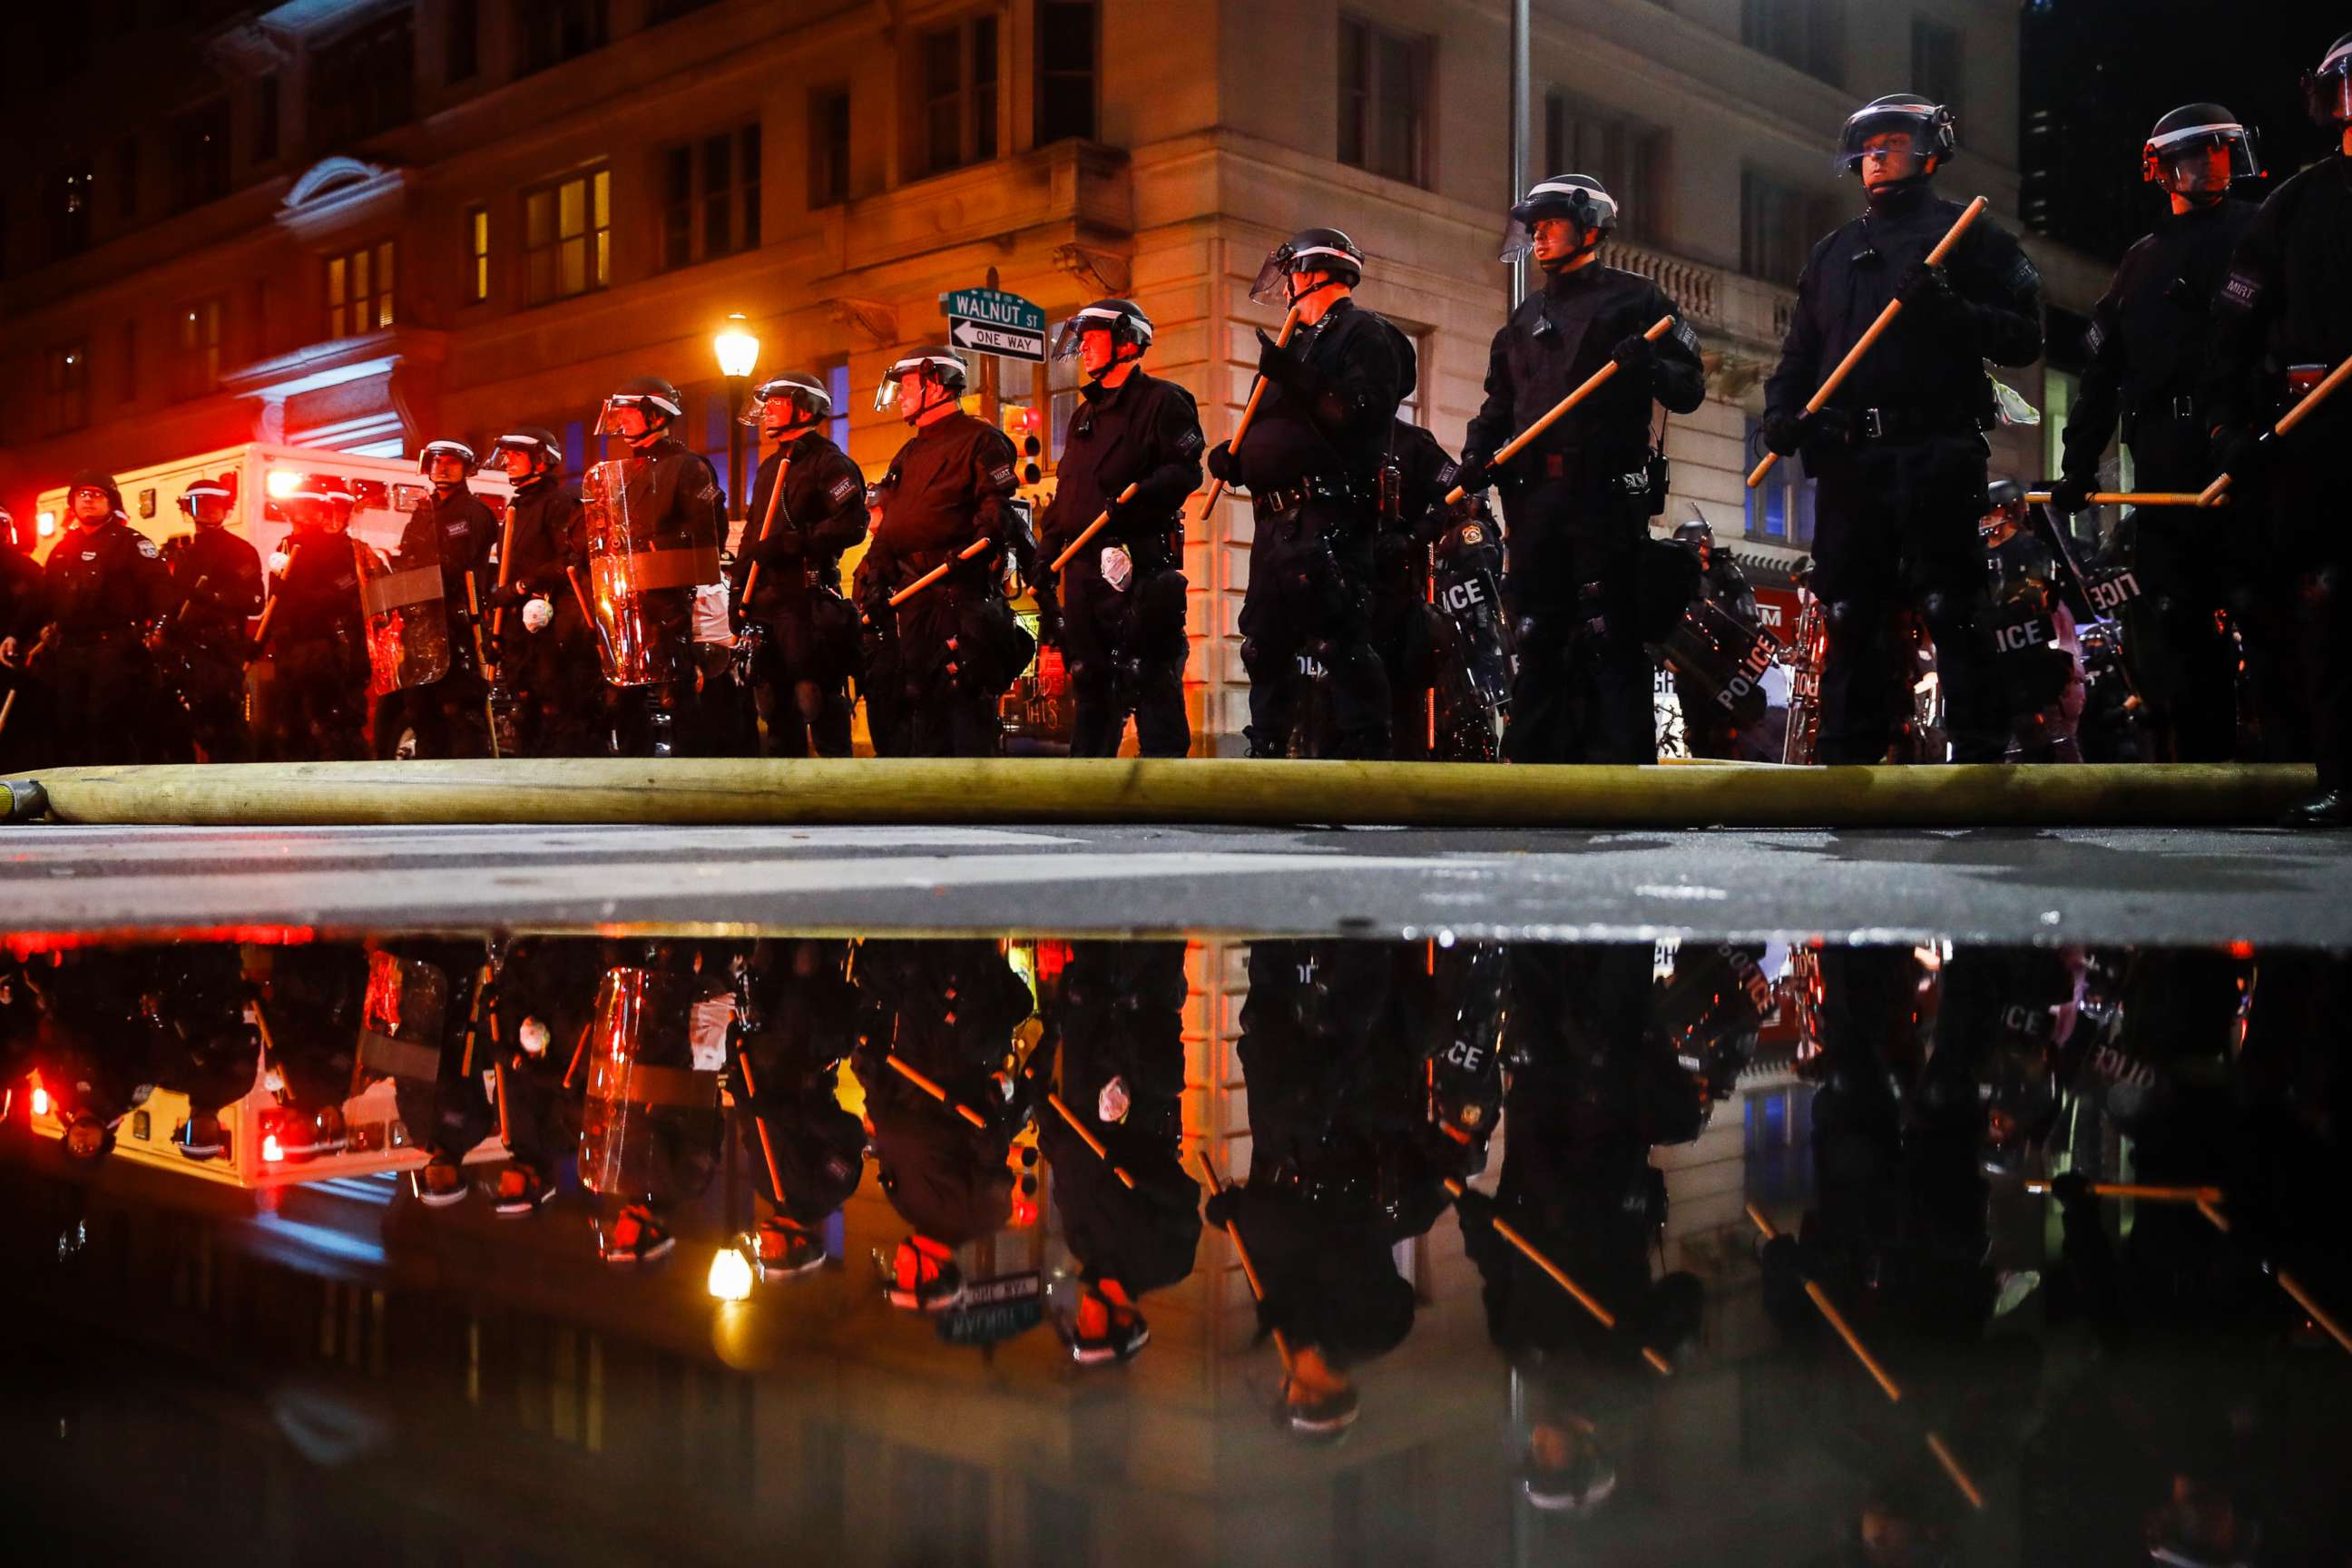 PHOTO: Police are reflected as they stand guard, May 30, 2020, in Philadelphia, during a protest over the death of George Floyd.